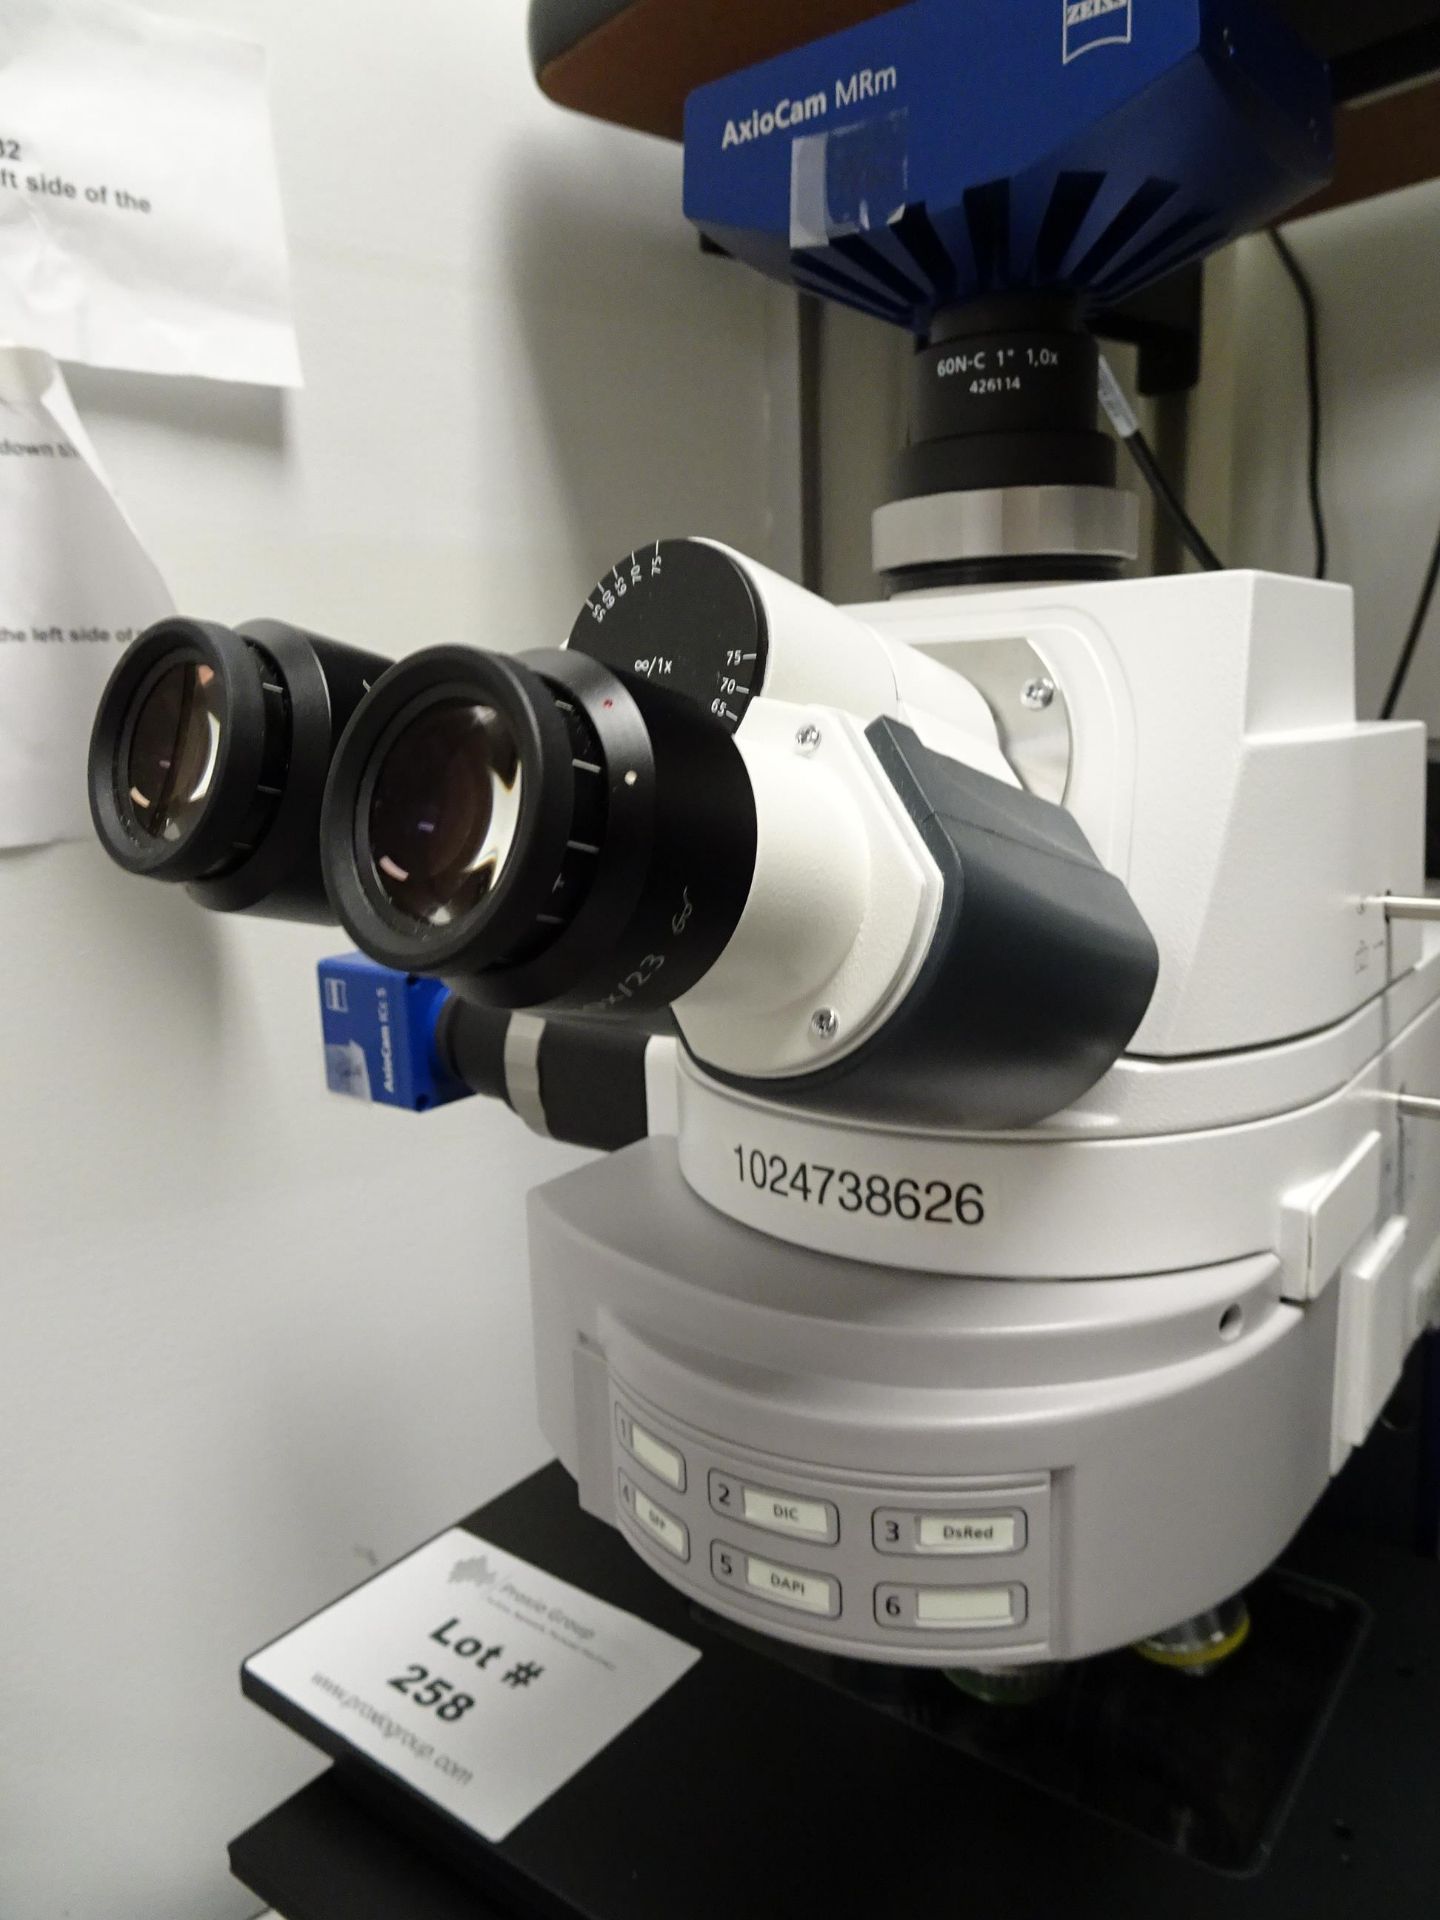 Zeiss Axio Imager.M2 Microscope With AxioCam MRM Camers With 60N-C 1" Camera Adapter, (2) 1PL 10x/23 - Image 10 of 22